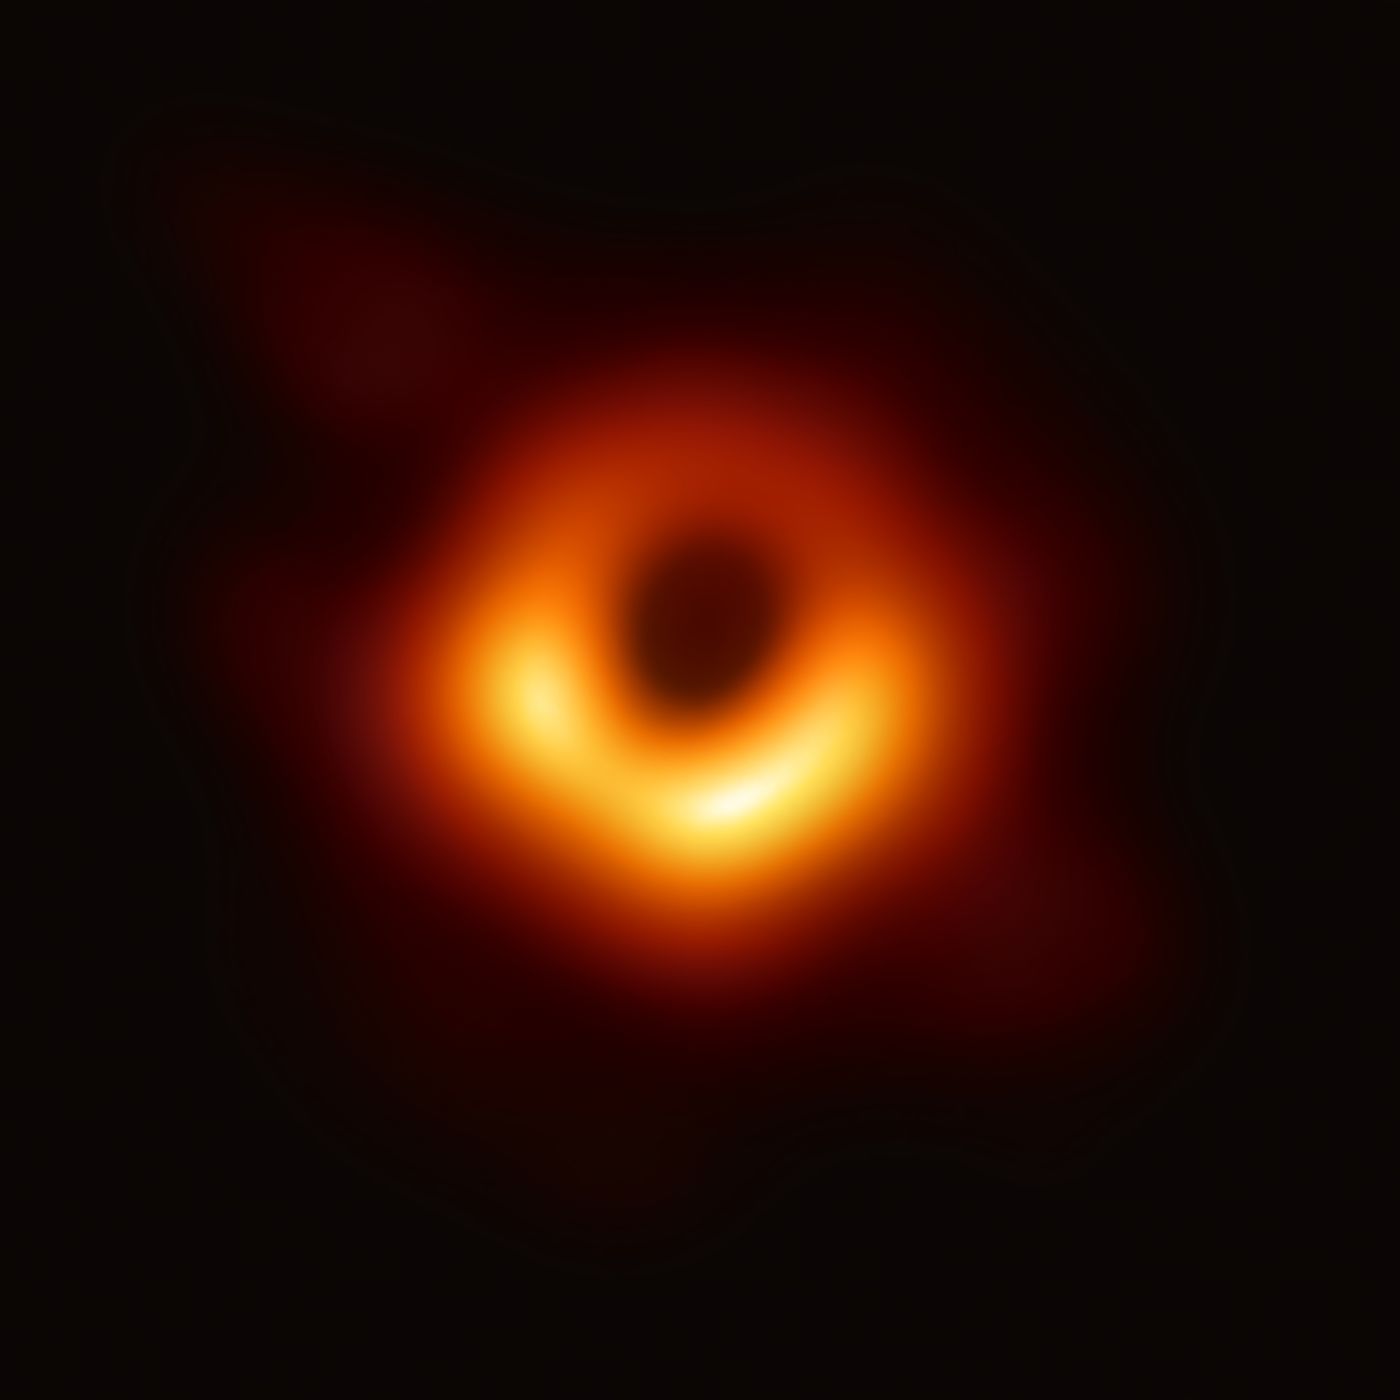 Image of the black hole at the center of Messier 87. (Credit: Event Horizon Telescope/European Southern Observatory)